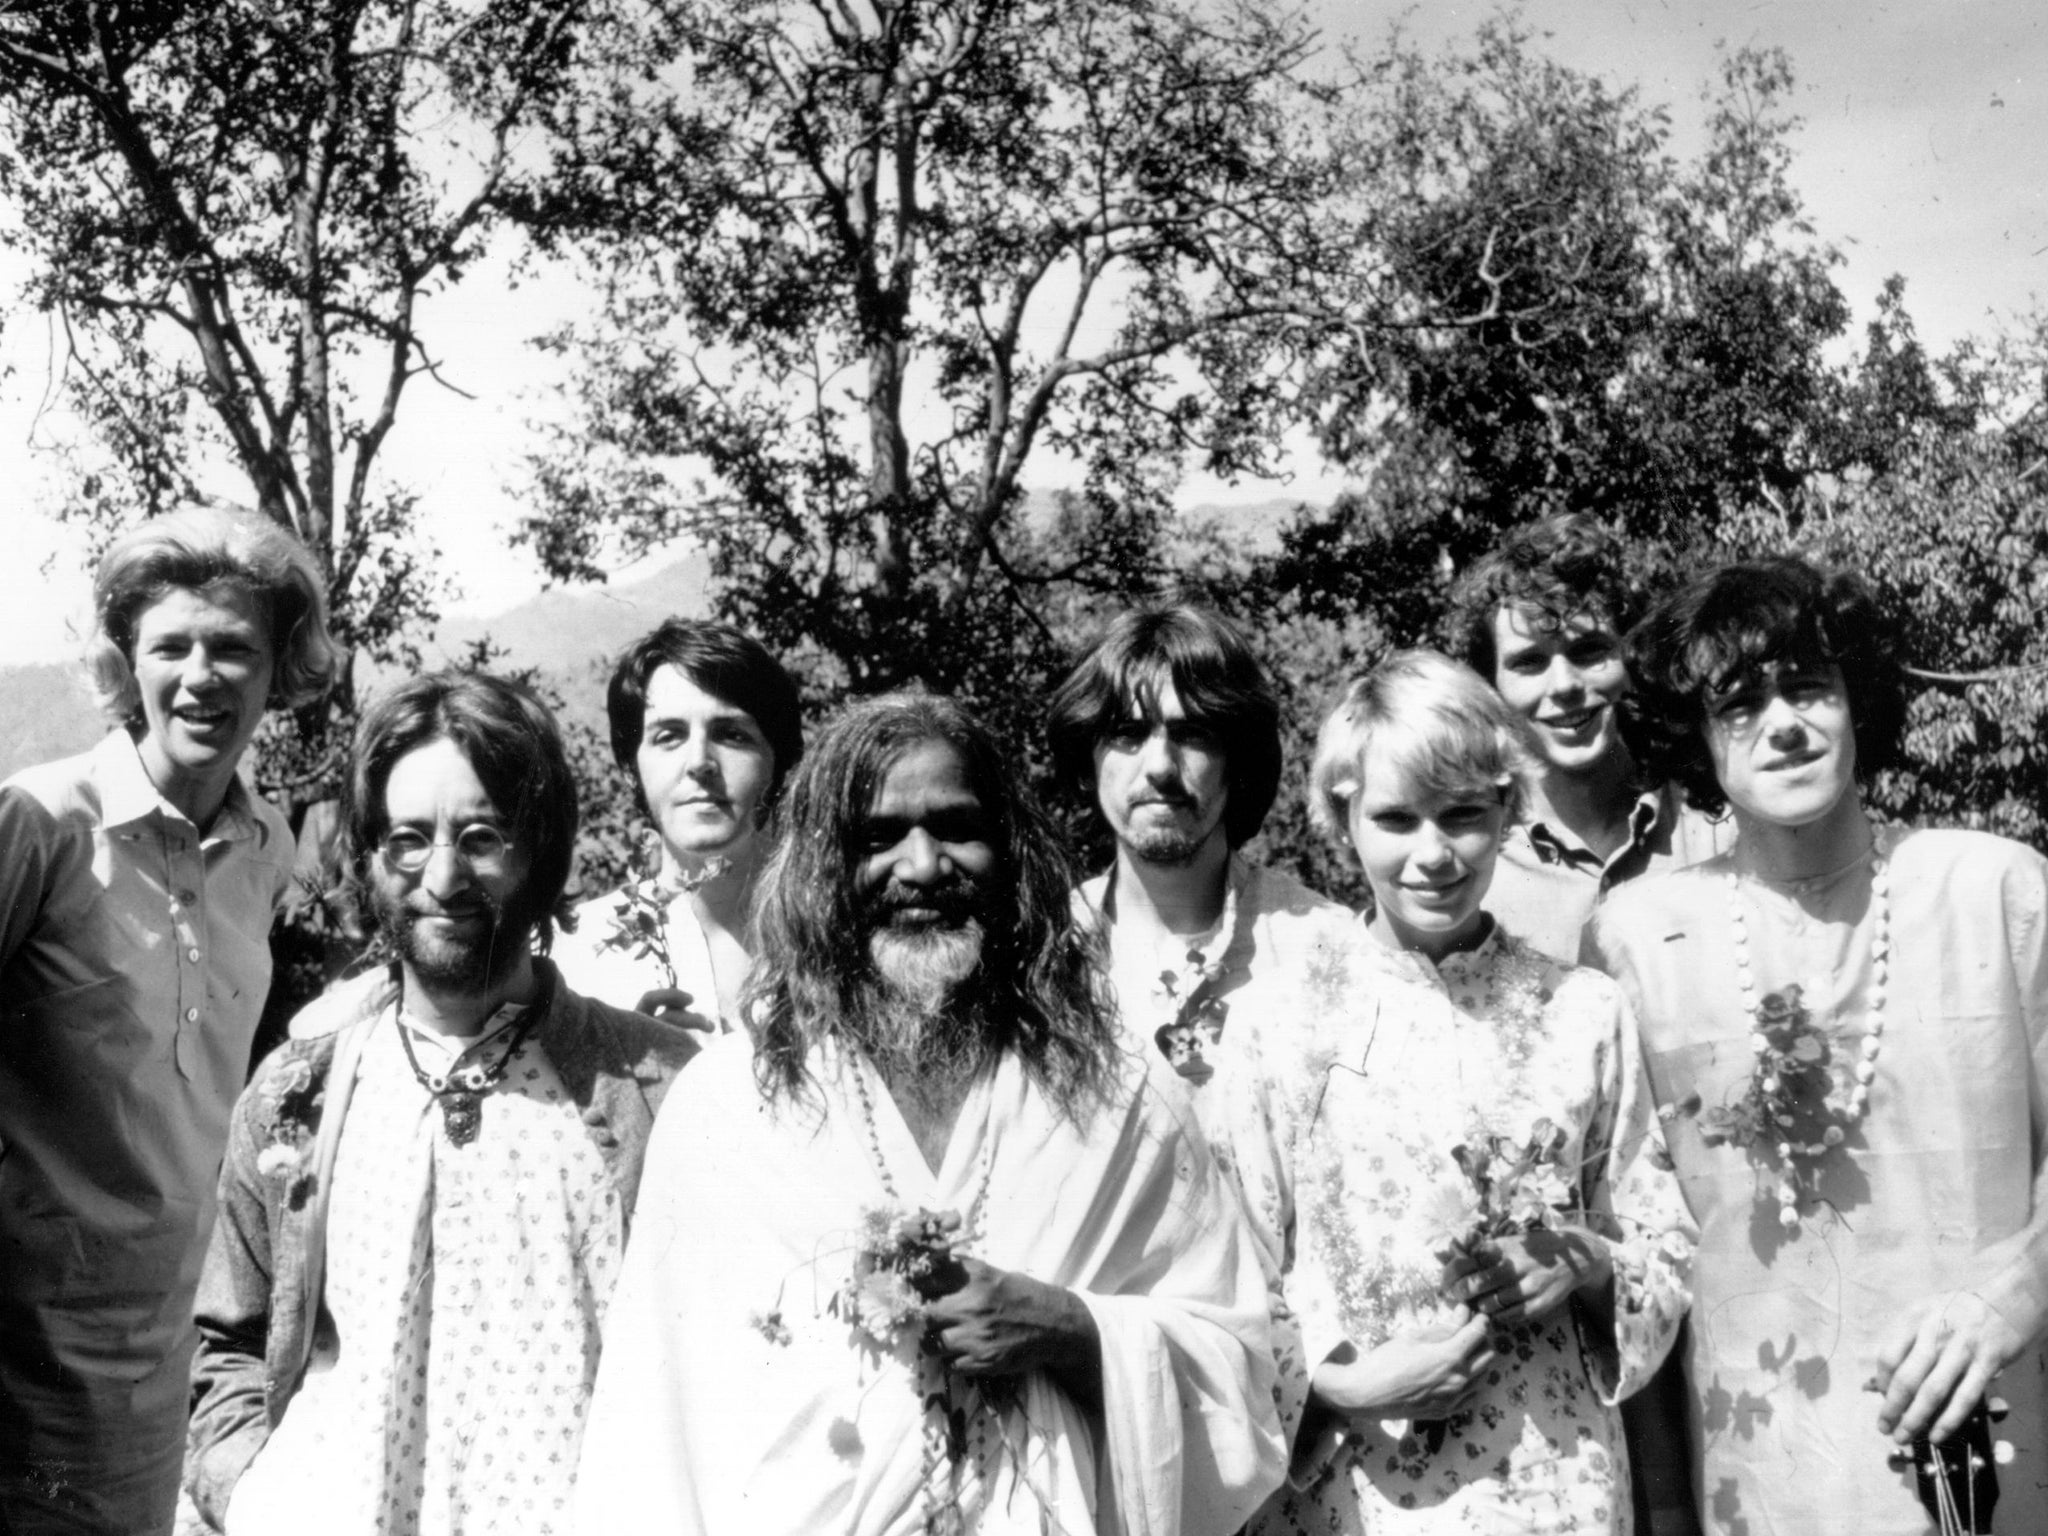 How the Indian influence on The Beatles impacted the West